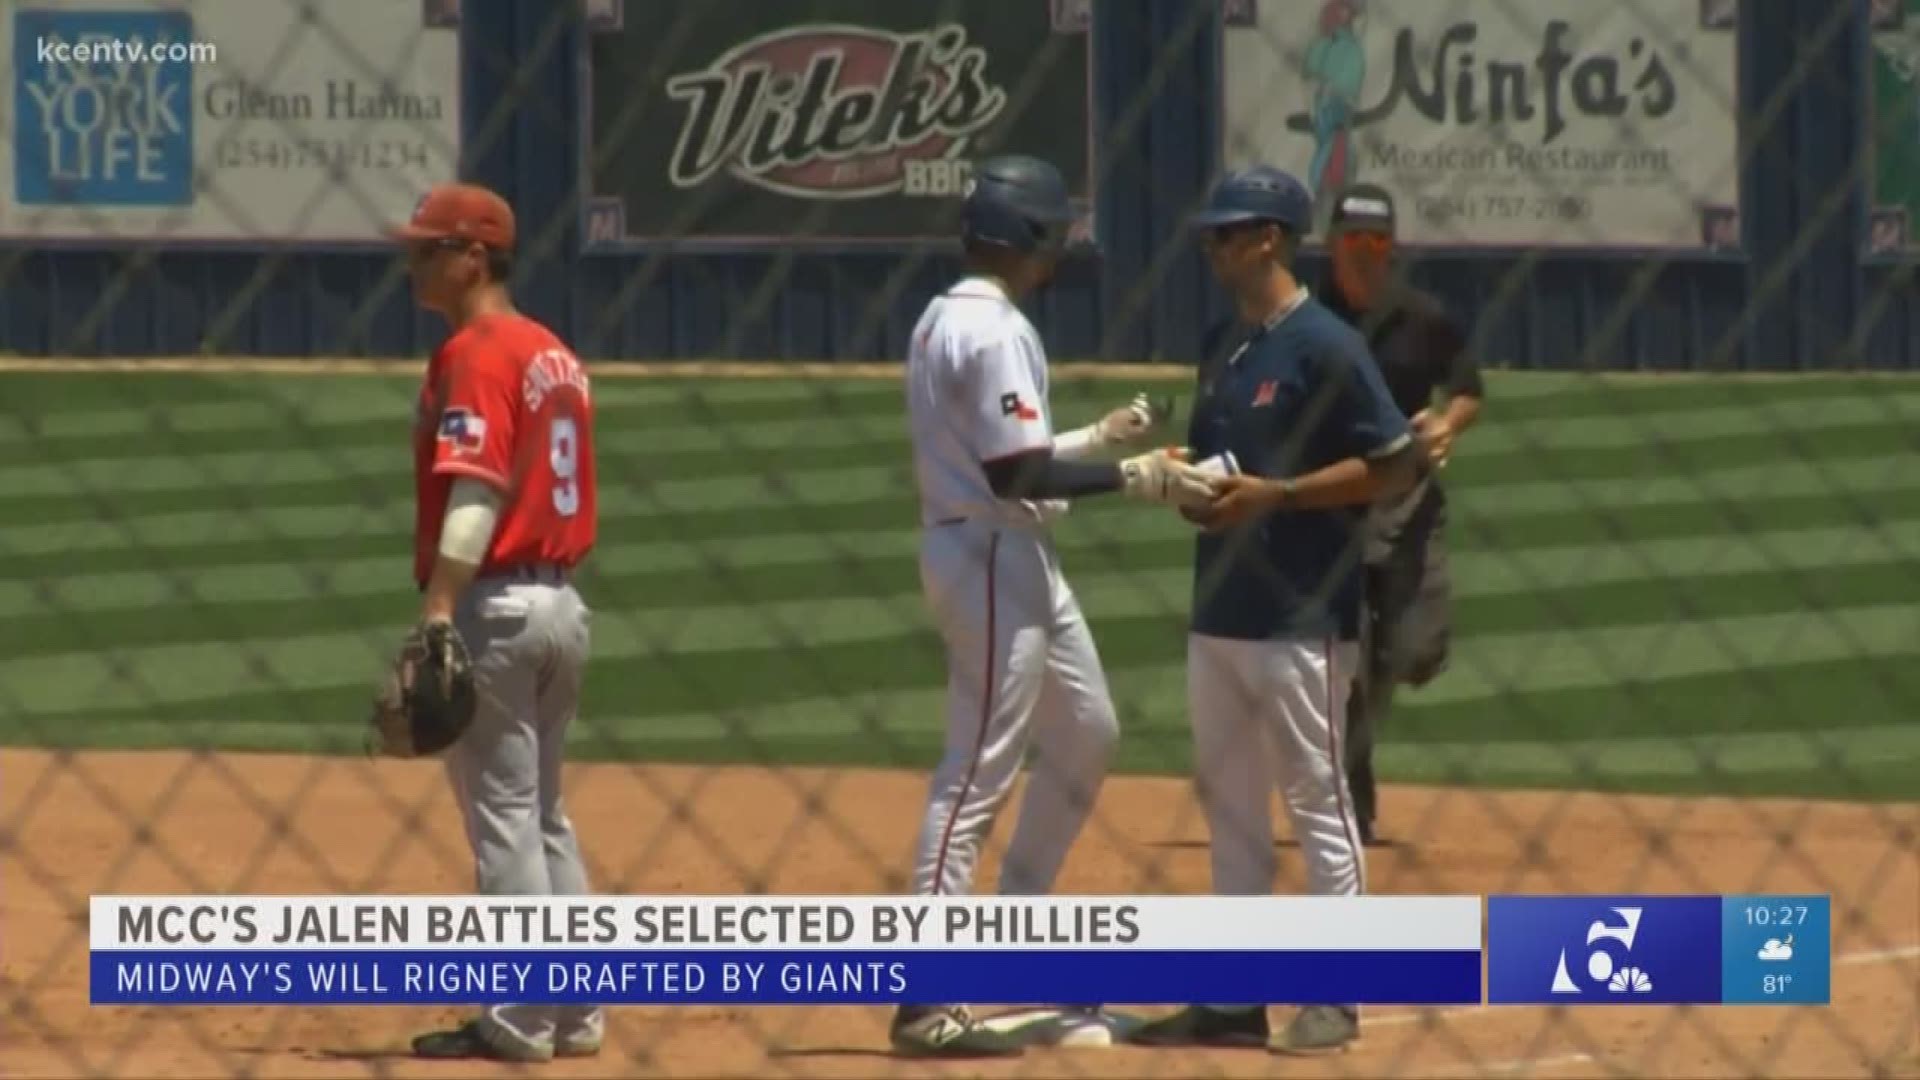 MCC shortstop Jalen Battles was selected in the 34th round by the Philadelphia Phillies.